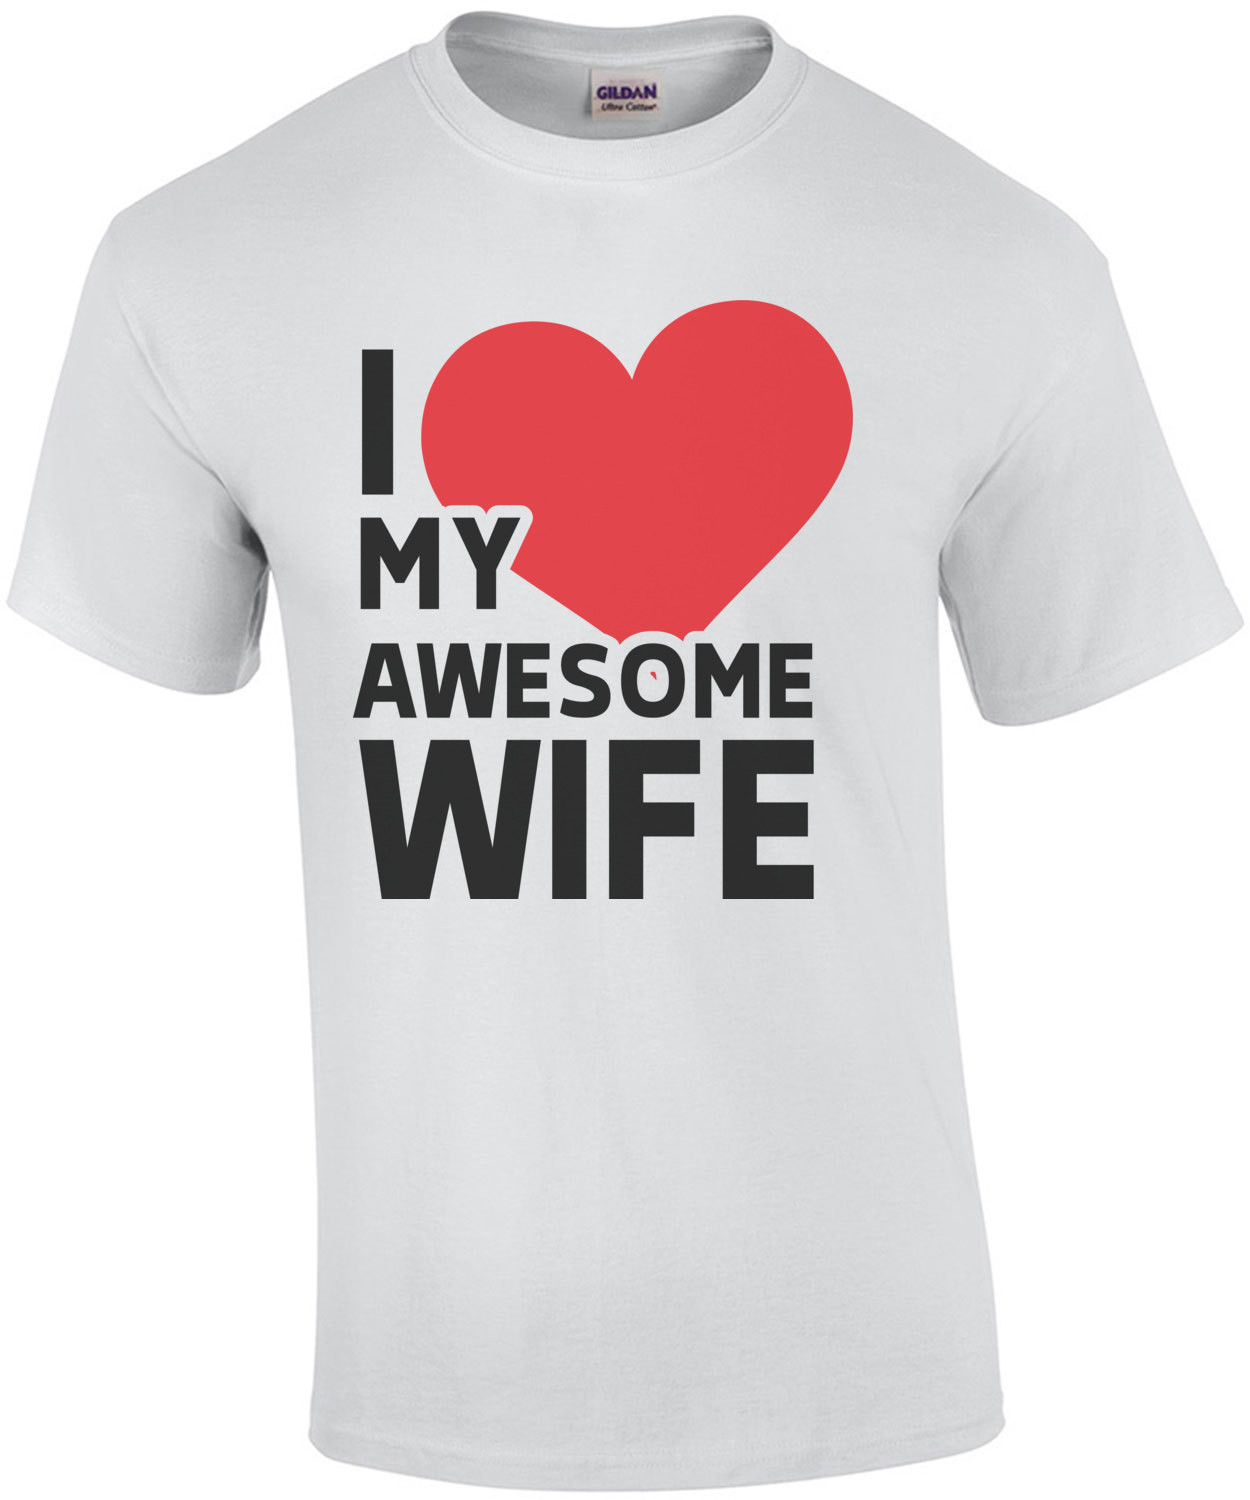 I love my awesome wife - wife